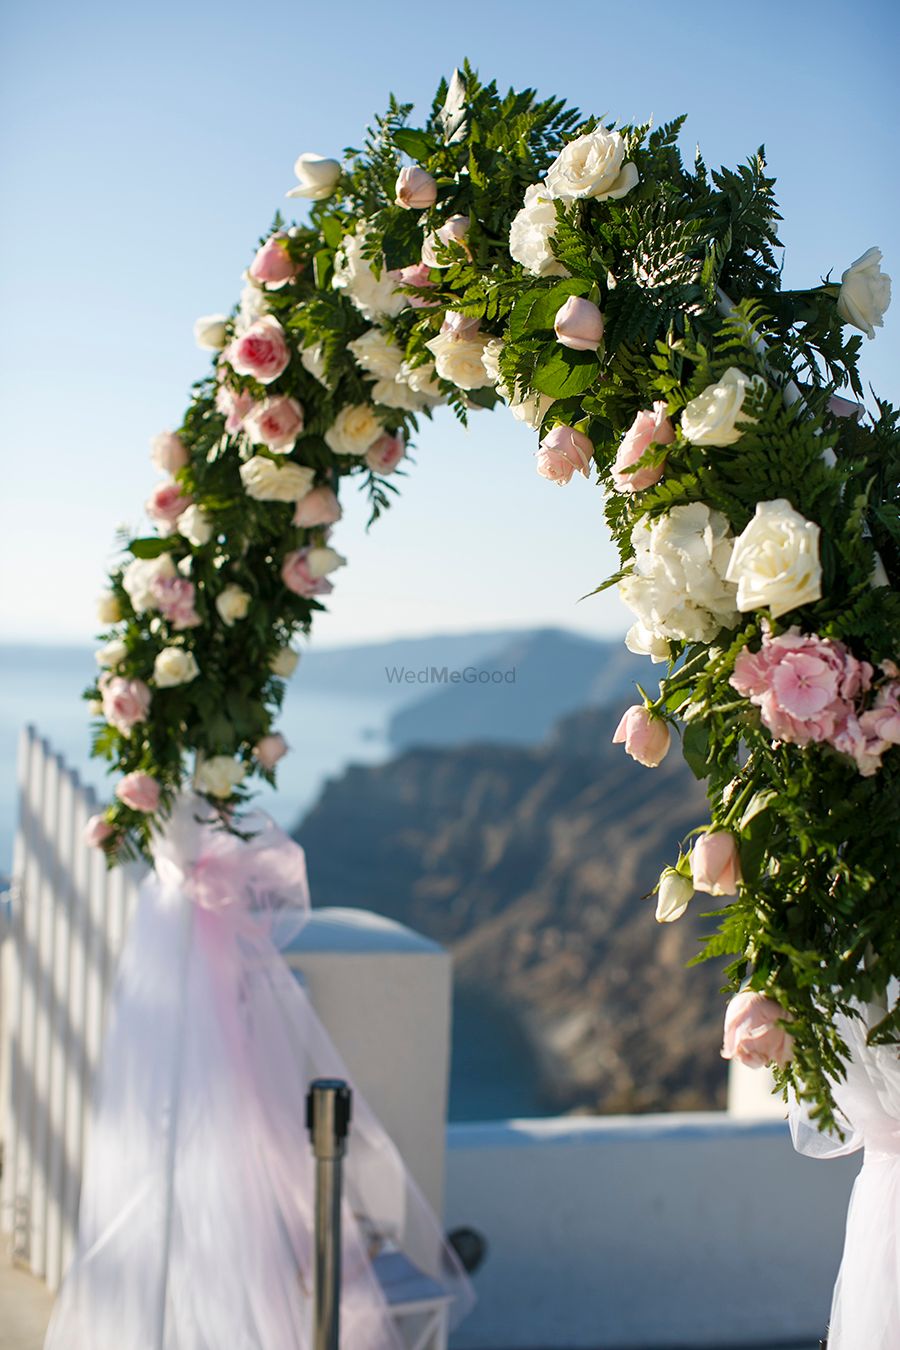 Photo By Marryme in Greece - Wedding Planners